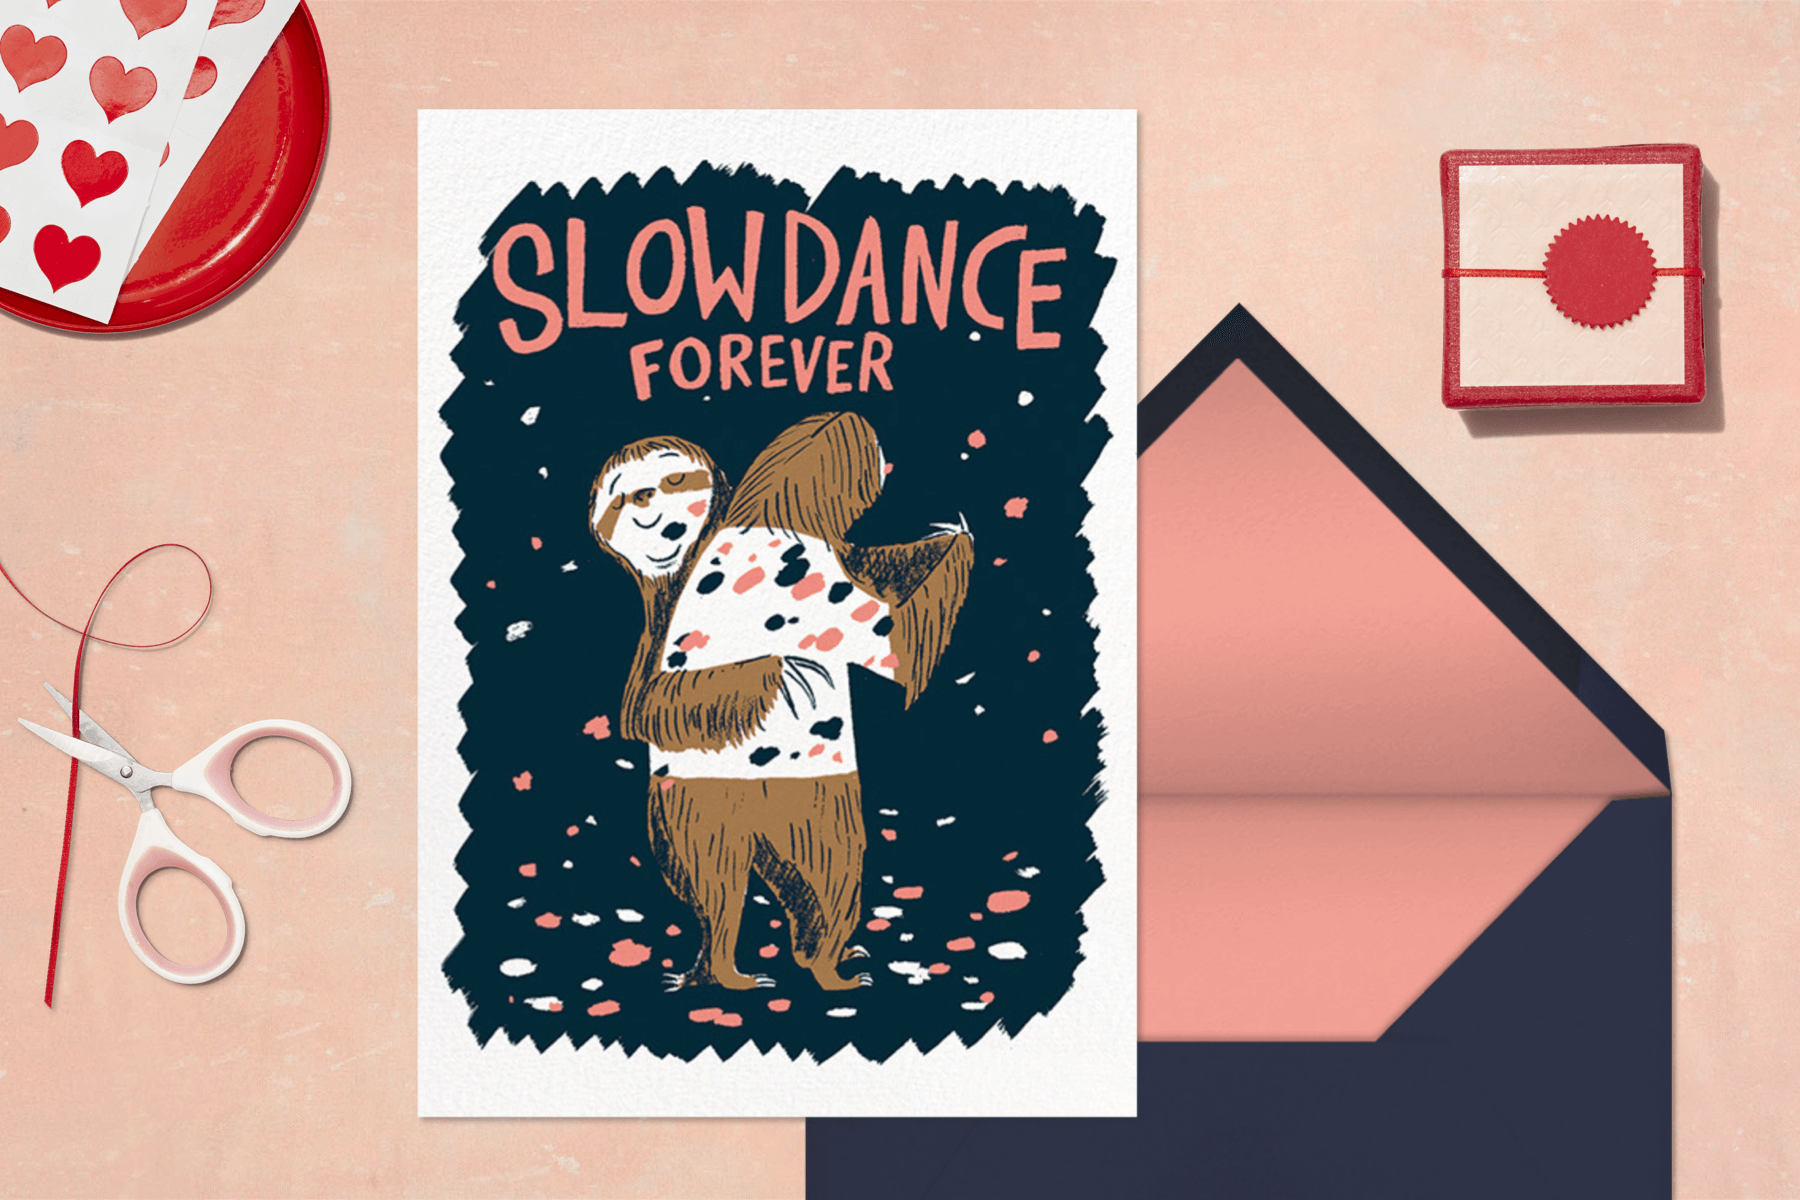 A Valentine’s Day card featuring a sloth illustration.